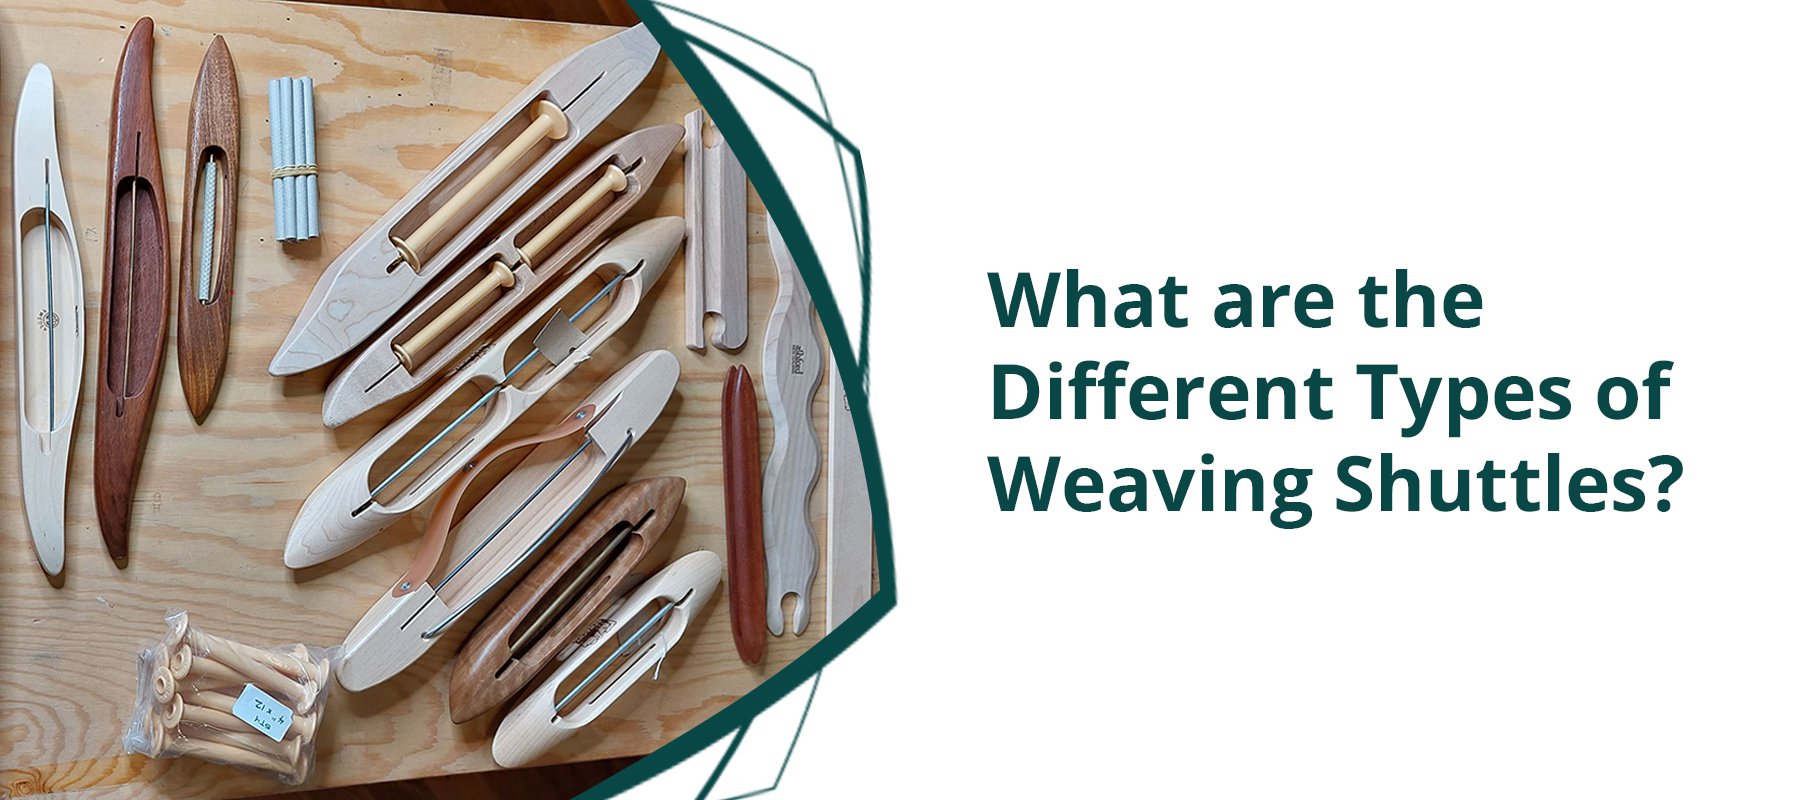 Weaving Shuttles: A Beginner's Guide to the Different Types of Weaving Shuttles and How to Use Them